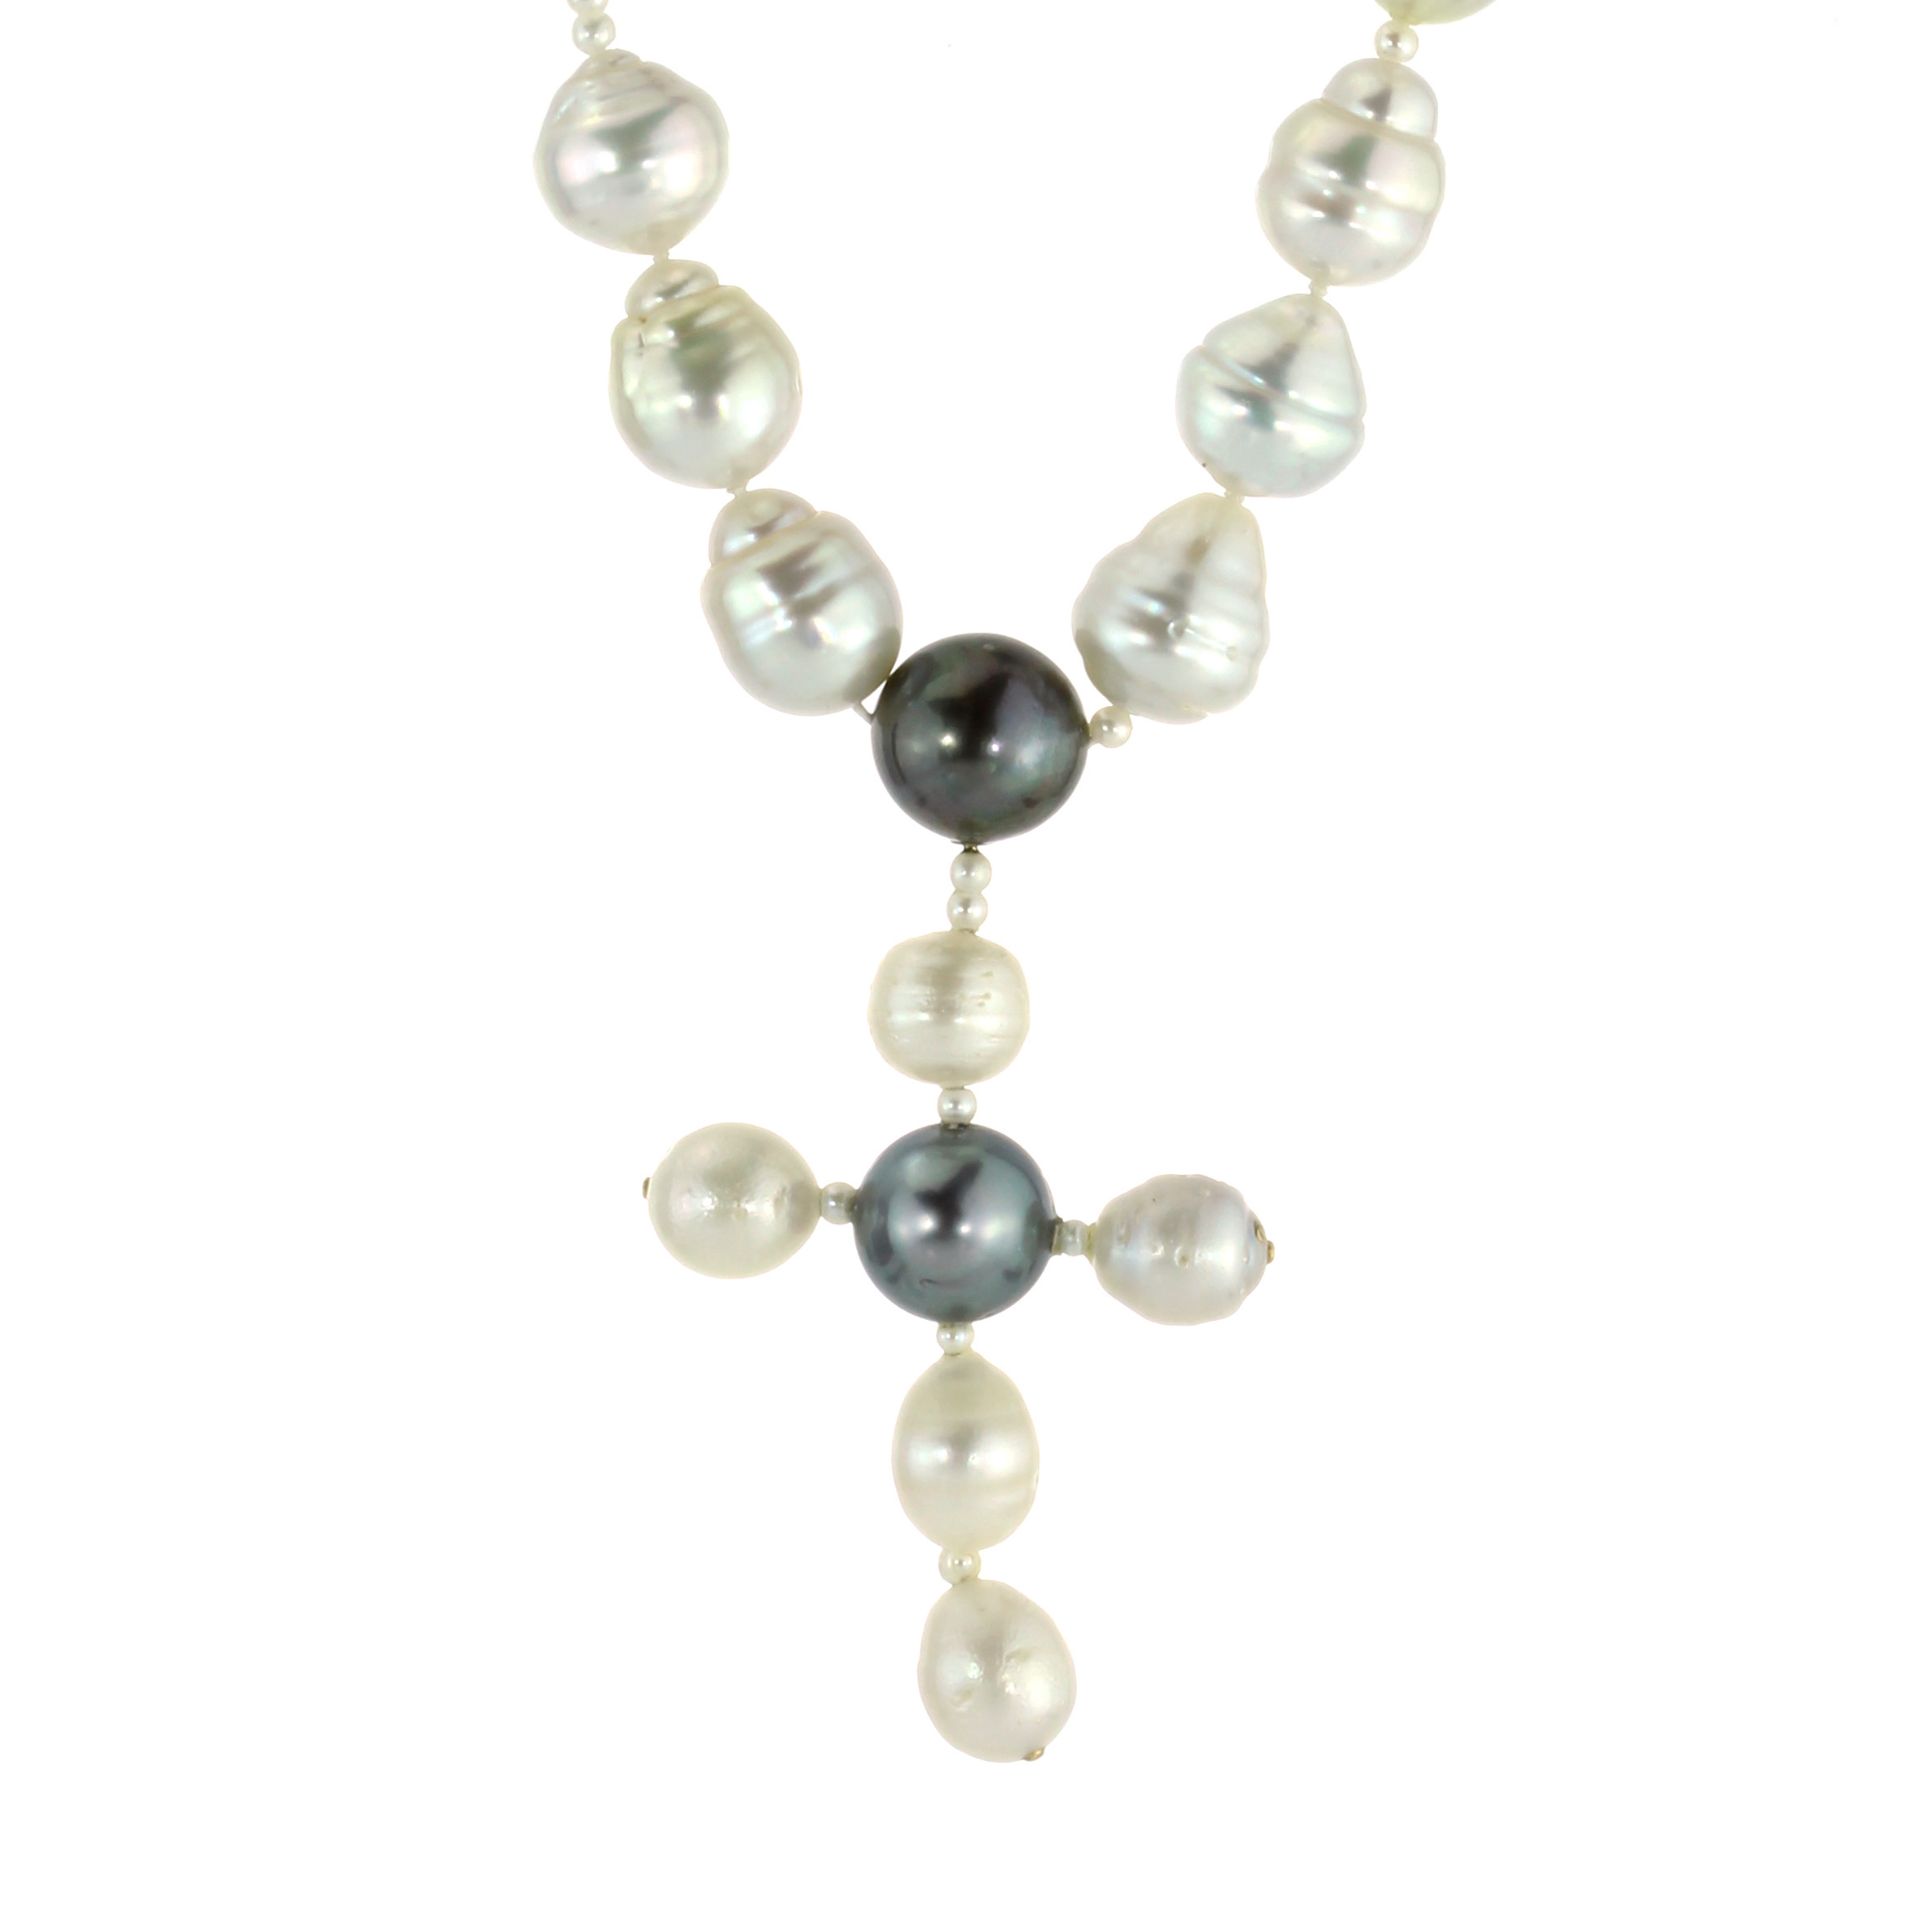 A SOUTH SEA PEARL CRUCIFIX / CROSS NECKLACE comprising a single row of large pearls punctuated